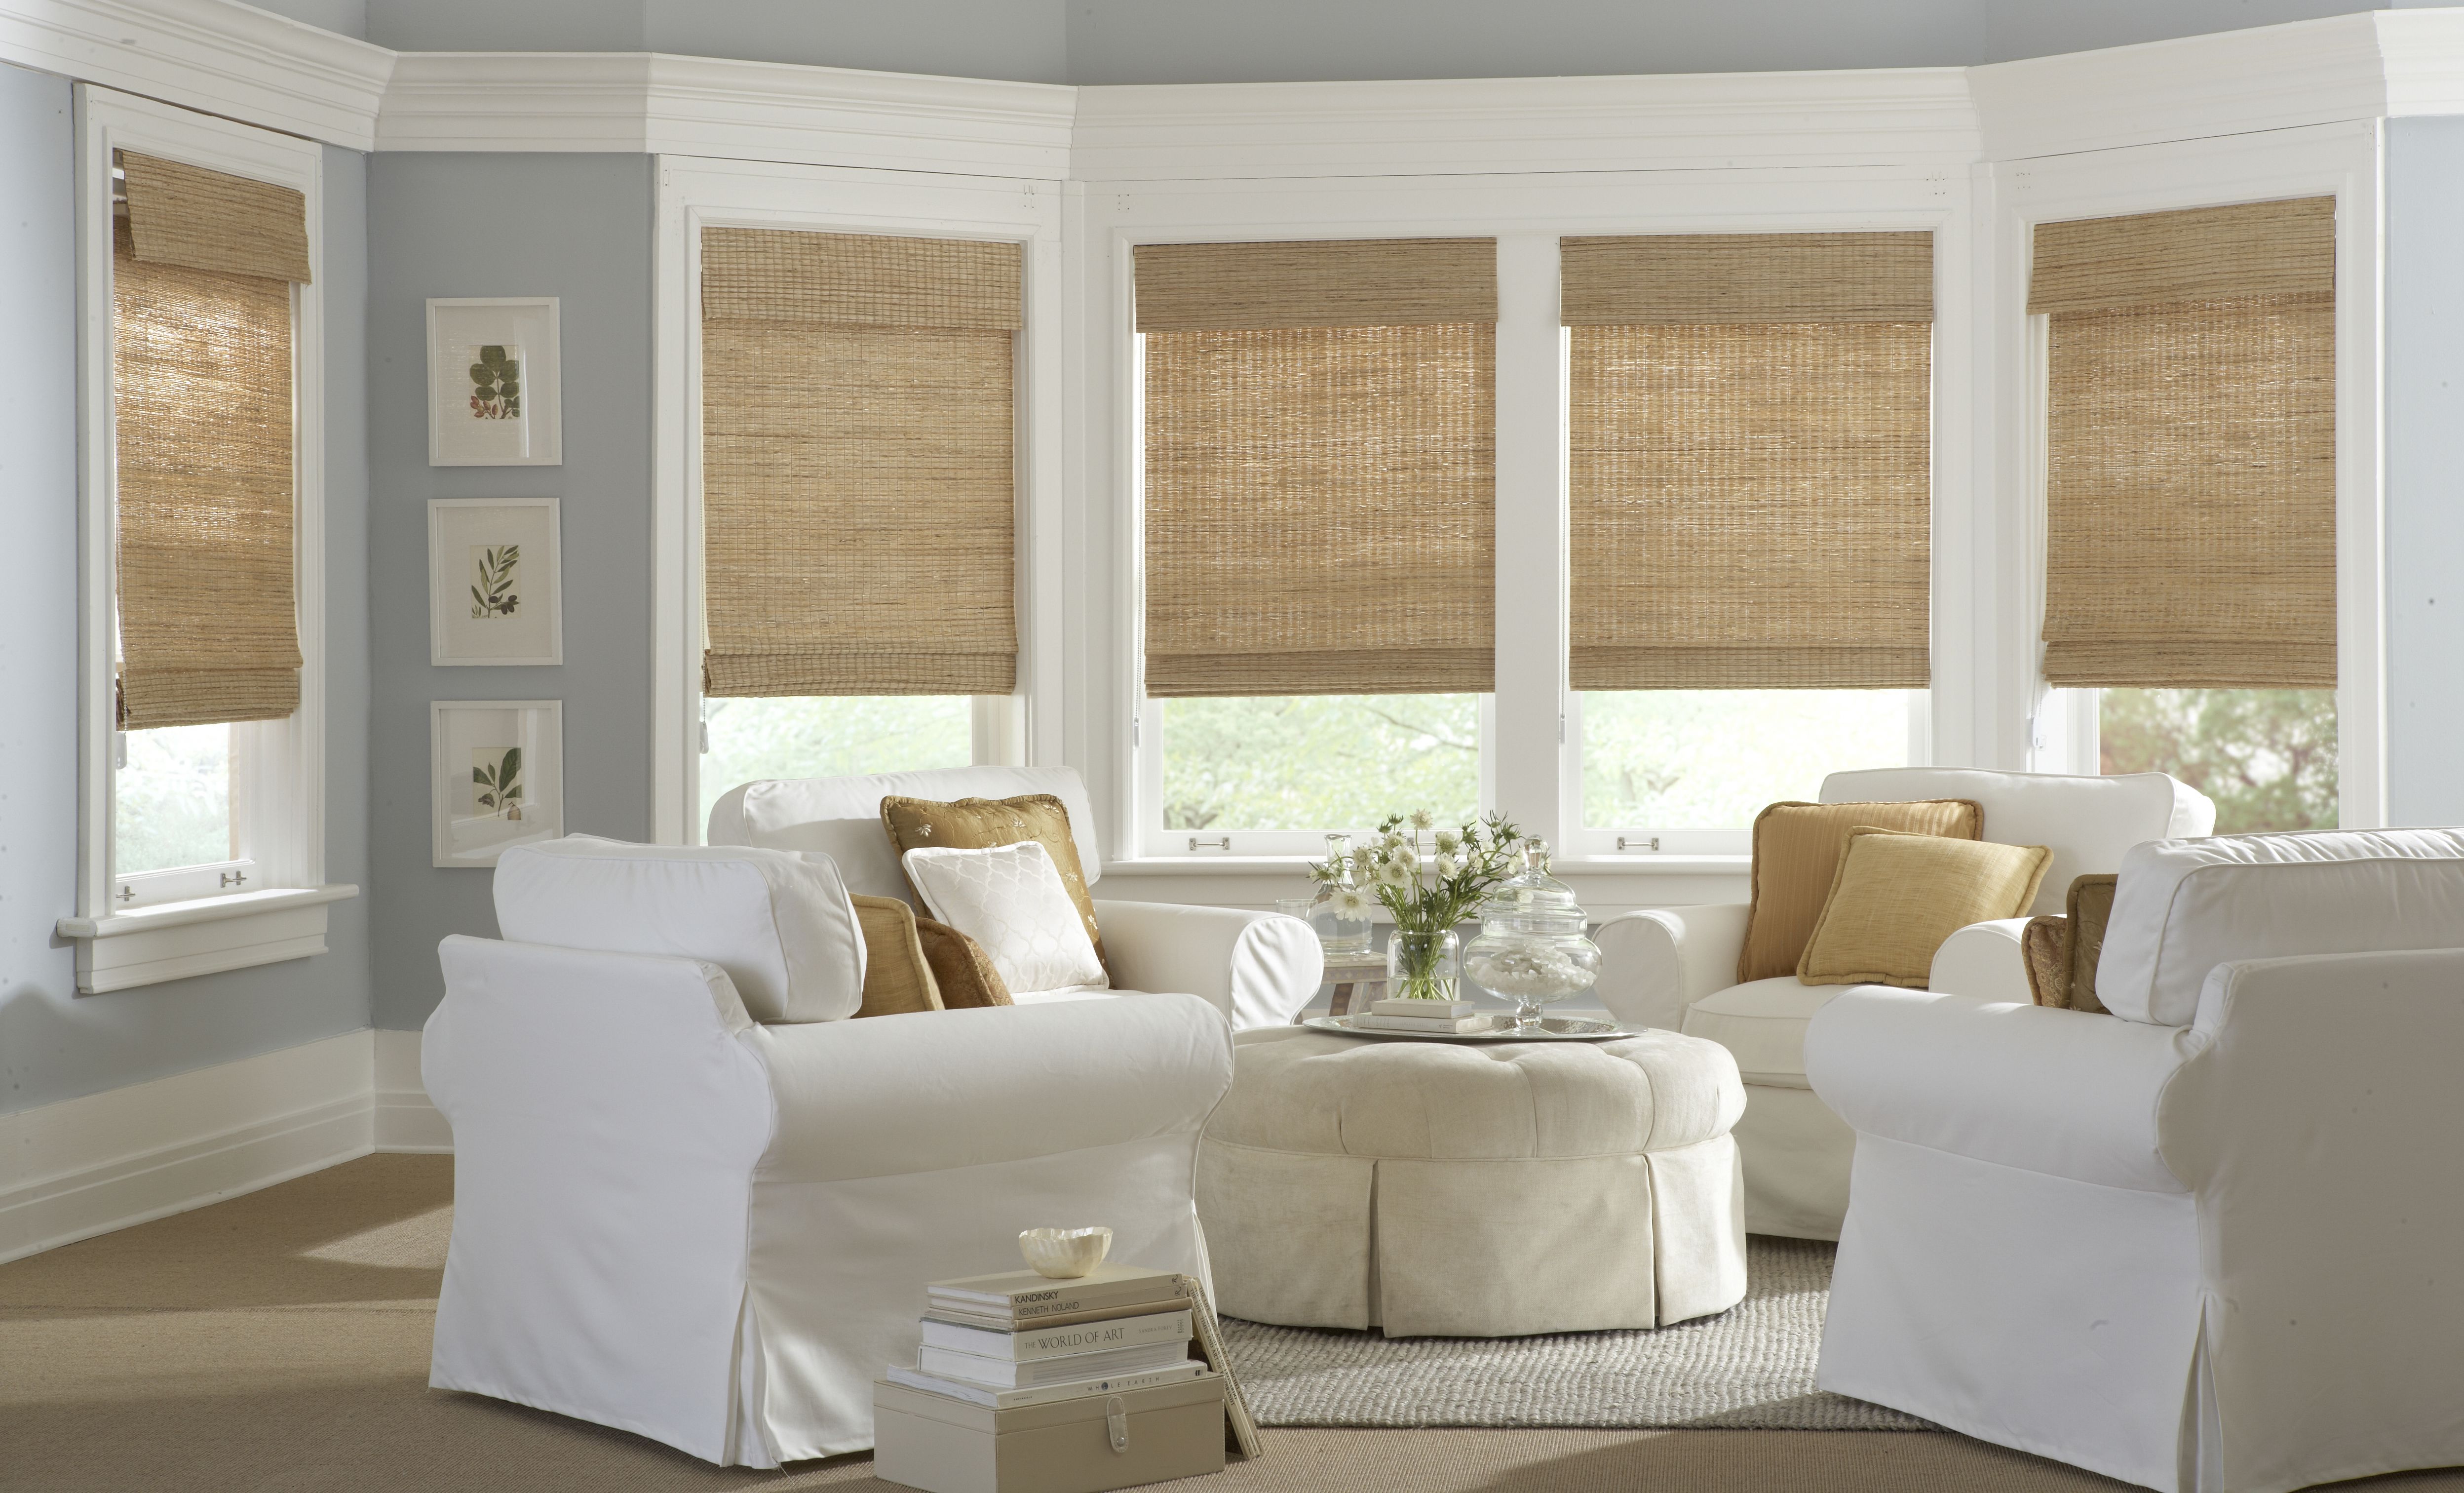 Great Matchstick Blinds That Help You Decorating Your Home: great ...